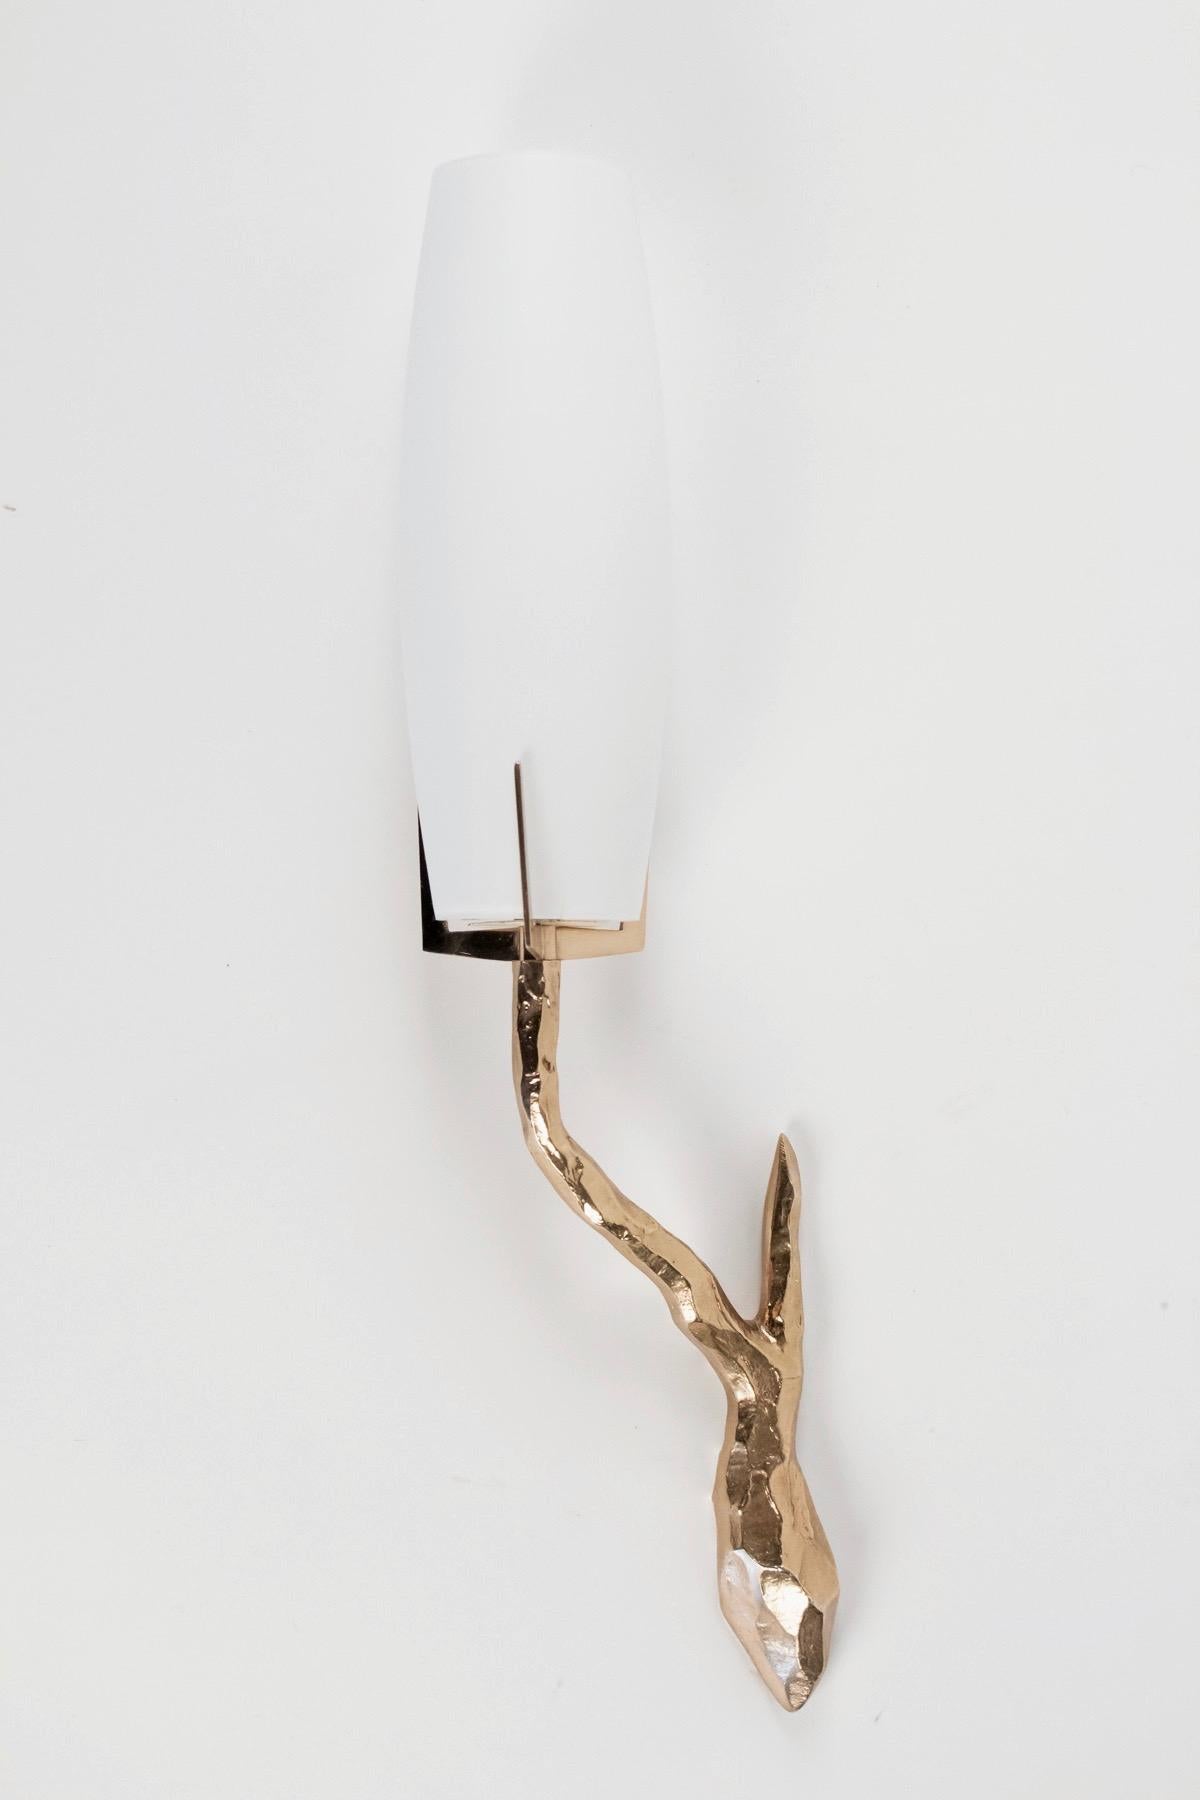 High quality sconces, all made of gilded bronze manufactured by Maison Arlus in the 1960s.
The arms are ended with the original cylindrical shades of white opaline glass.
The arms figure wooden branch or lightning bolt, their design can be